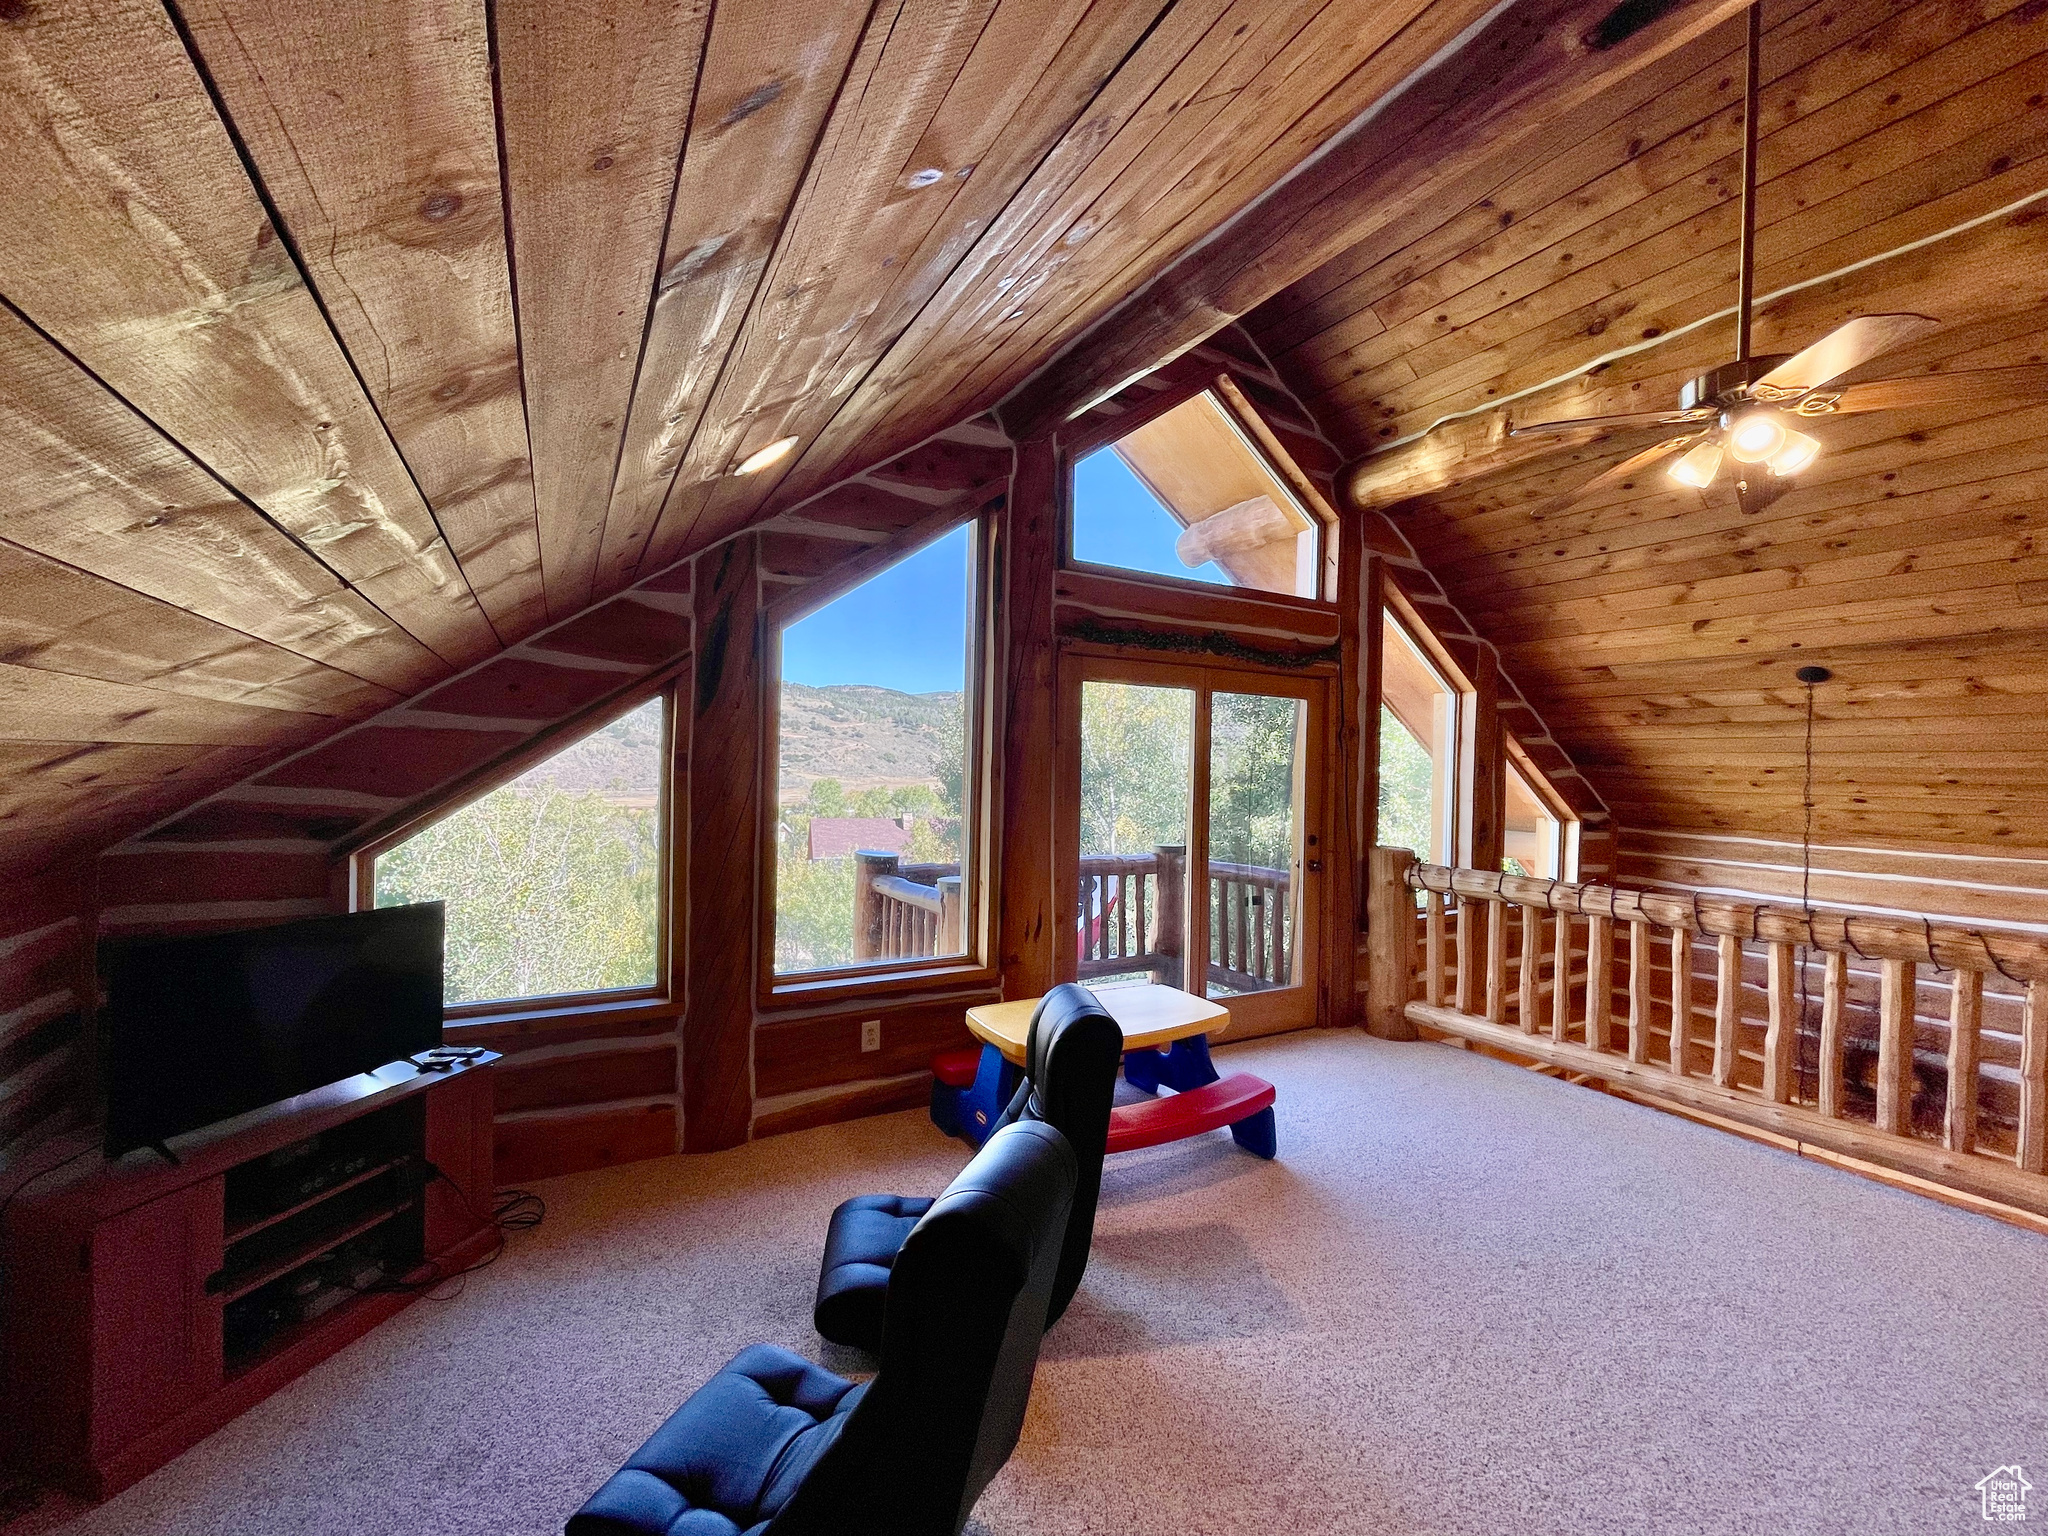 Interior space featuring wood ceiling, a healthy amount of sunlight, carpet, and vaulted ceiling